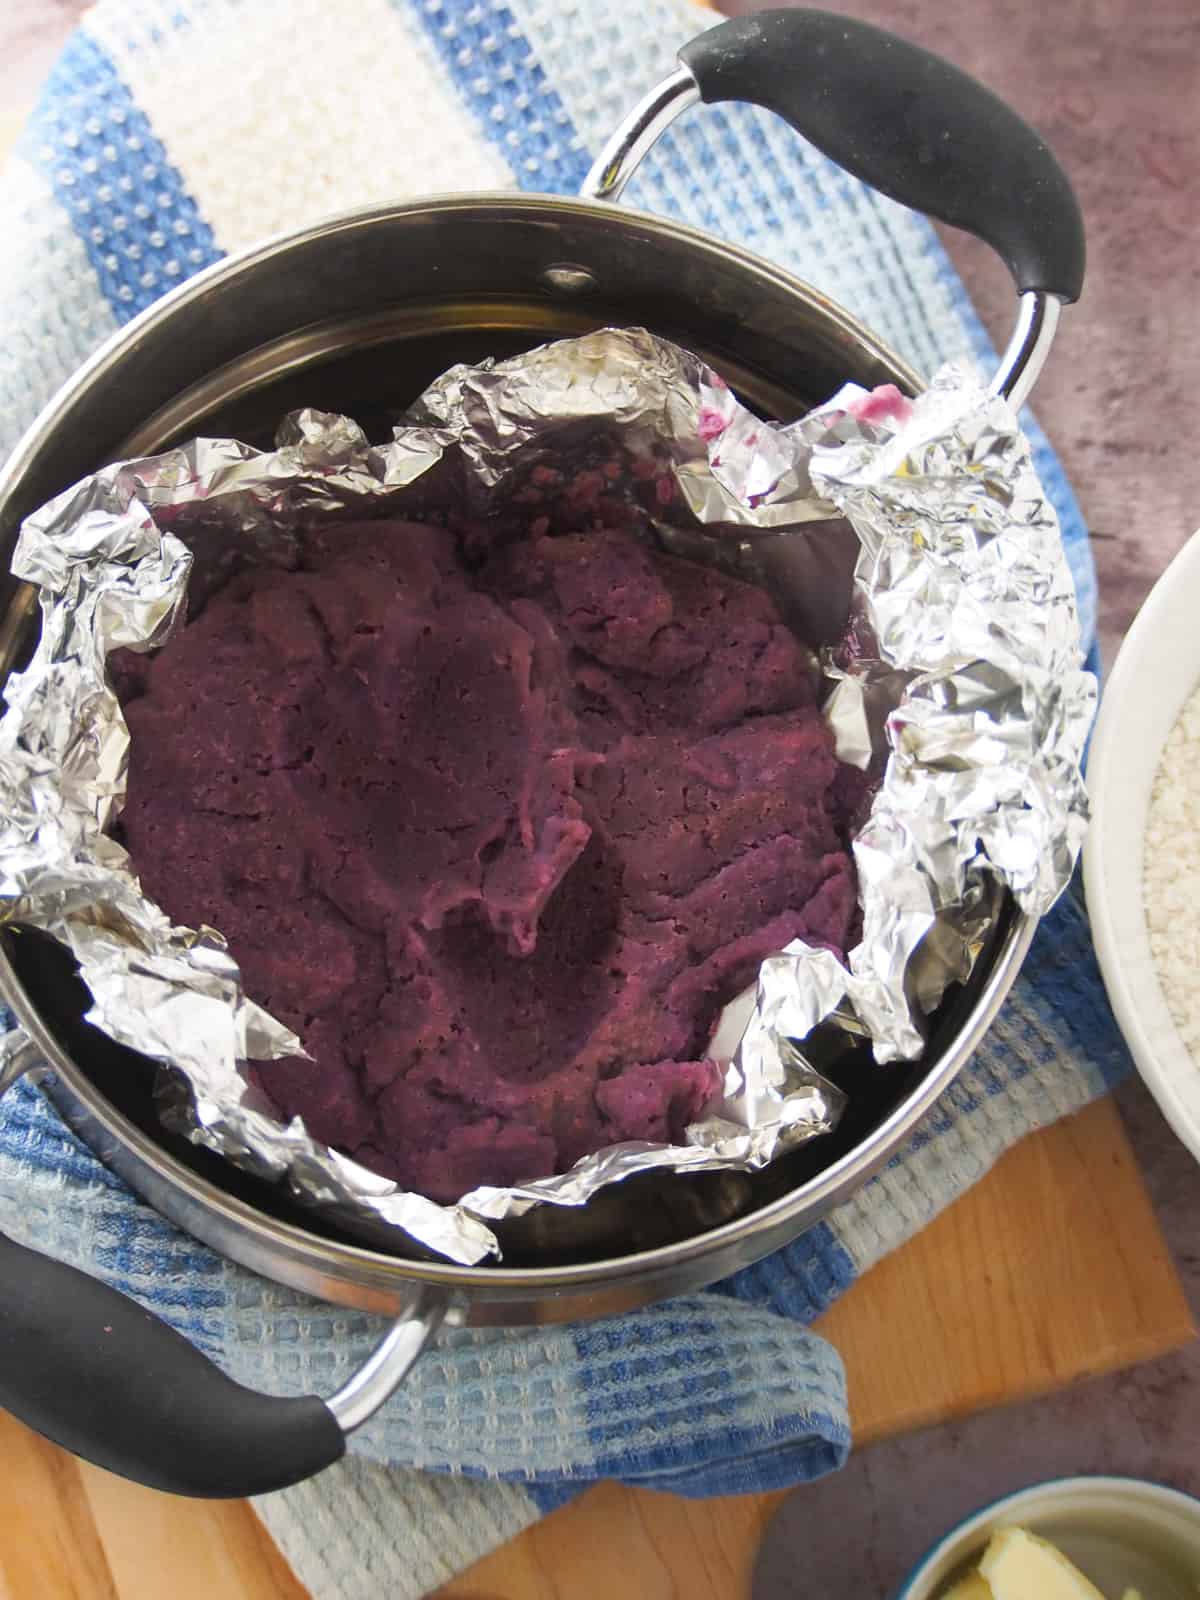 mashed purple yam in a steamer.